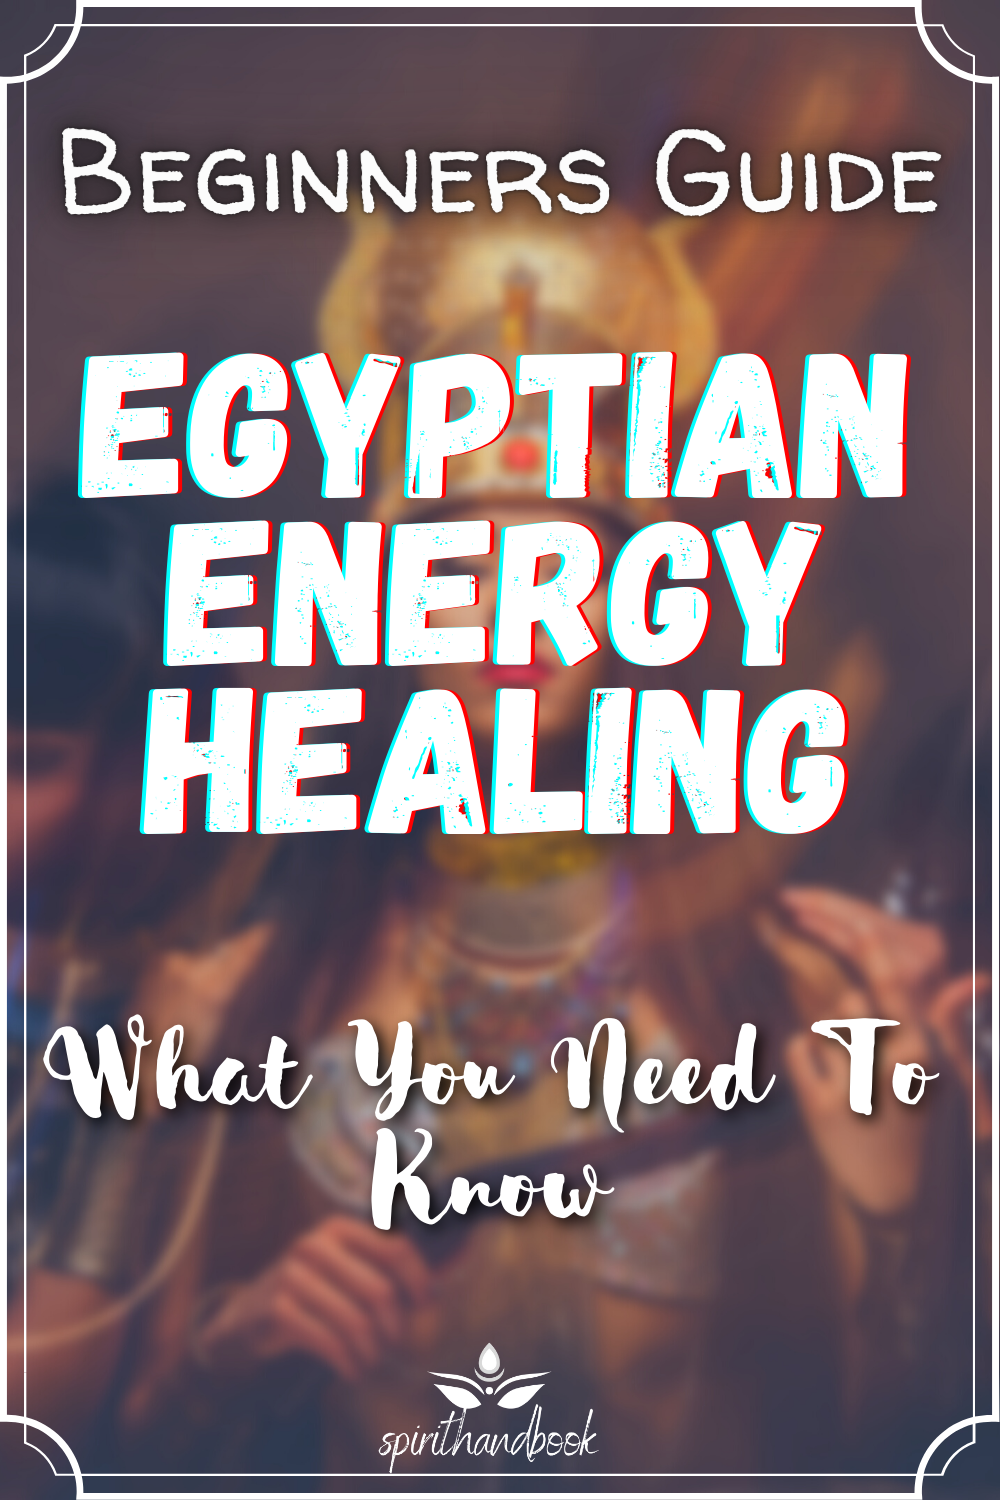 Egyptian Energy Healing For Beginners – What You Need To Know